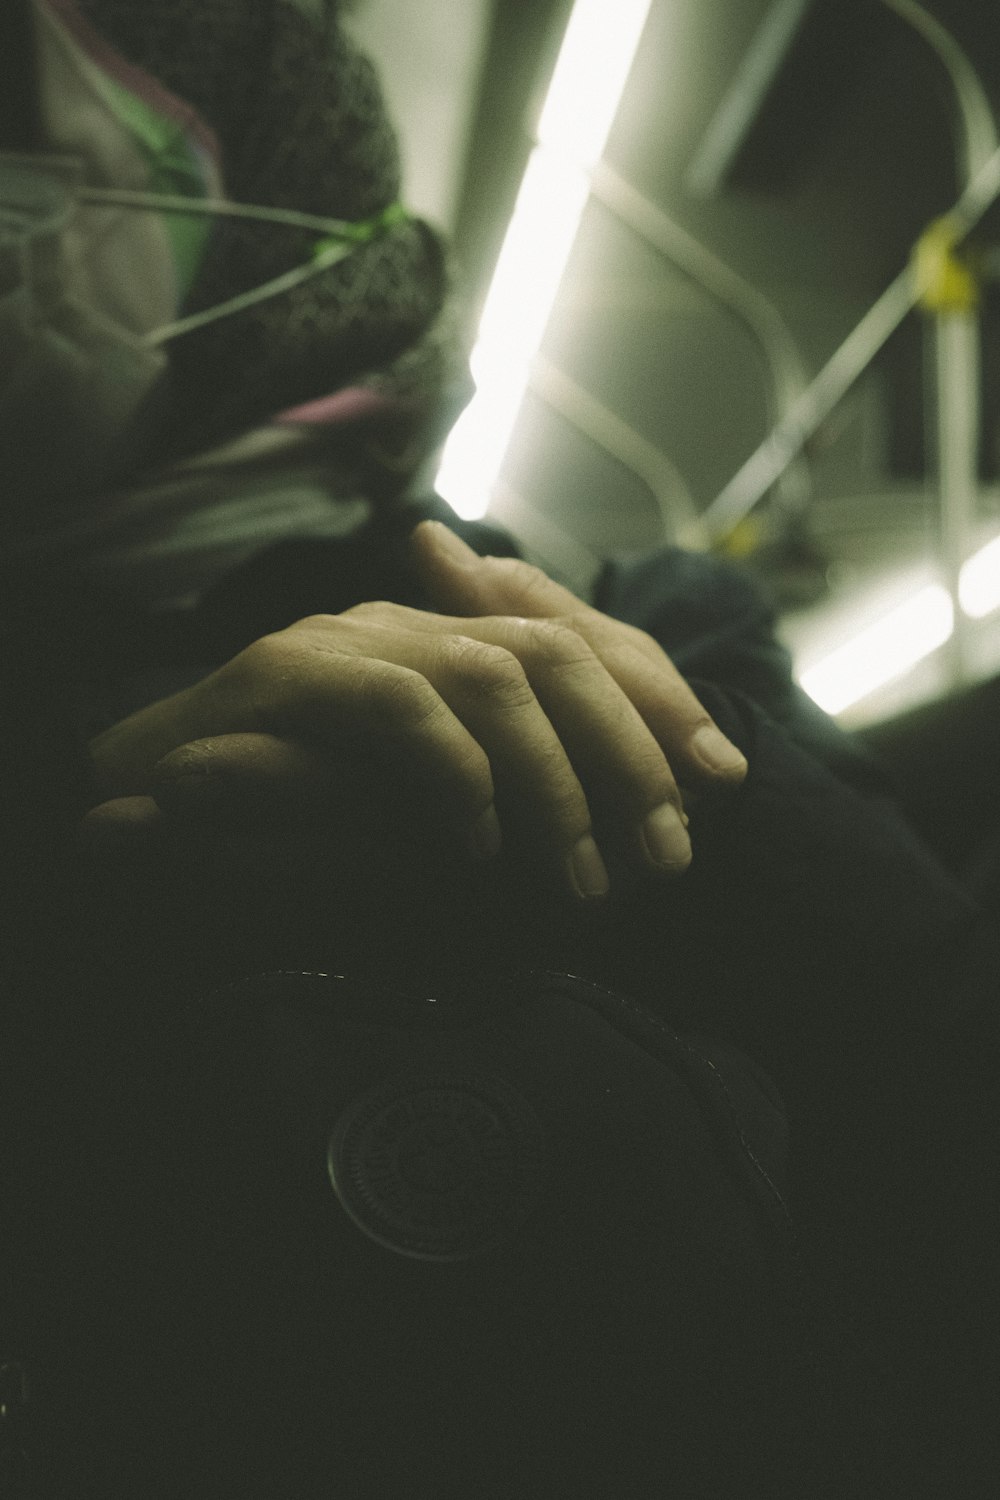 a person's hand resting on the seat of a bus